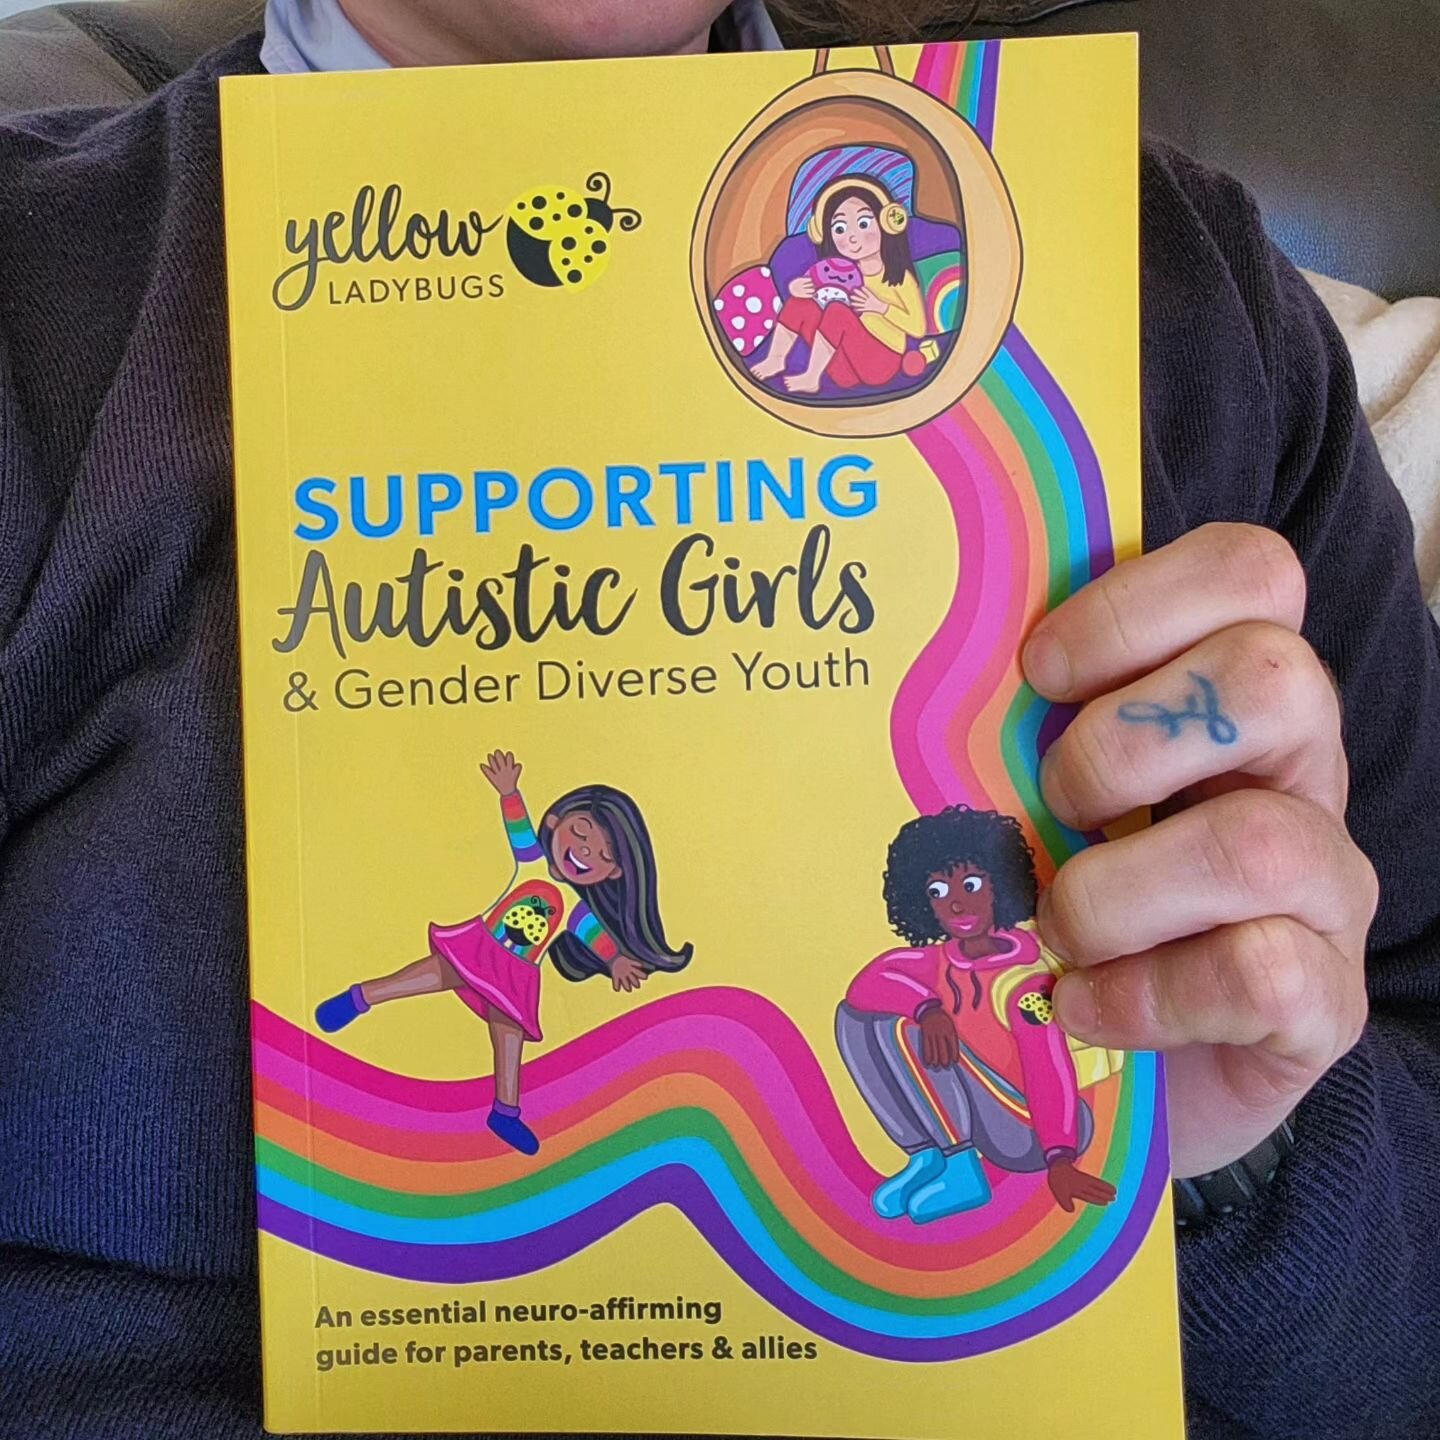 I got this book from Yellow Lady Bugs a while back when I attended their conference &ndash; they've got some pretty good resources for the Autistic community, both free and paid. 

No affiliation, just a fan of useful stuff.